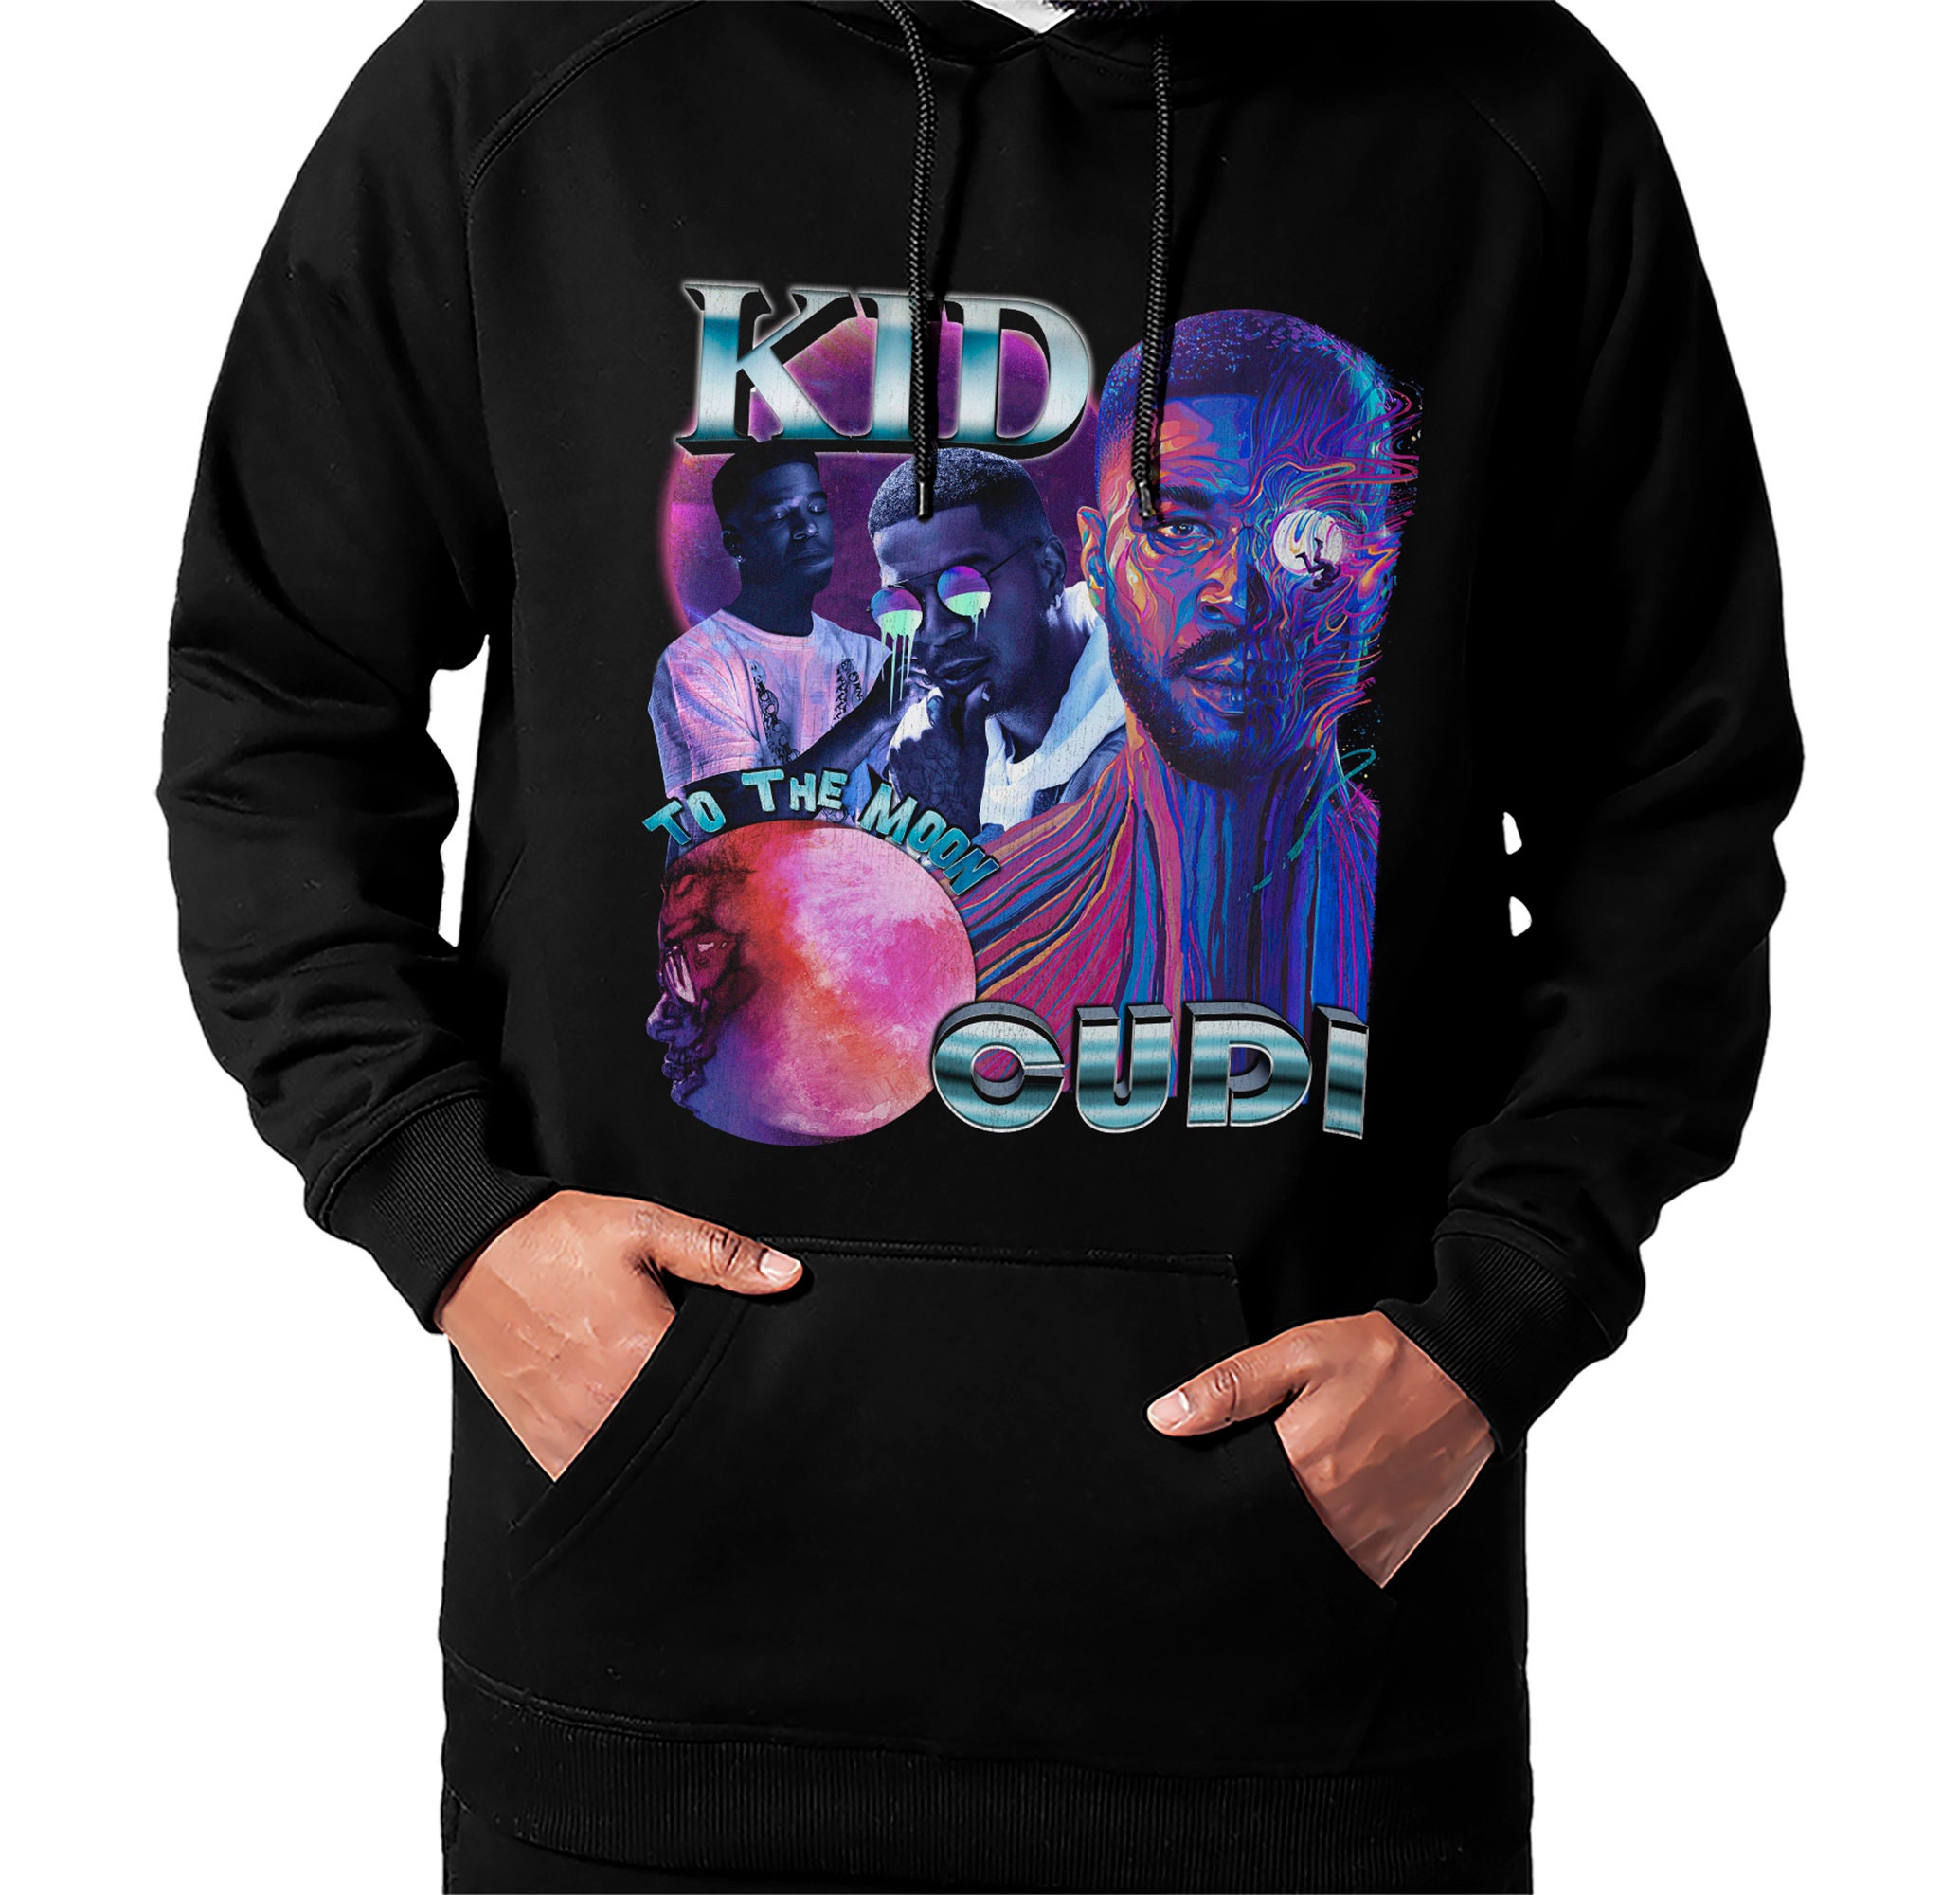 To The Moon Tour 2022 Kid Cudi Graphic Unisex T-Shirt